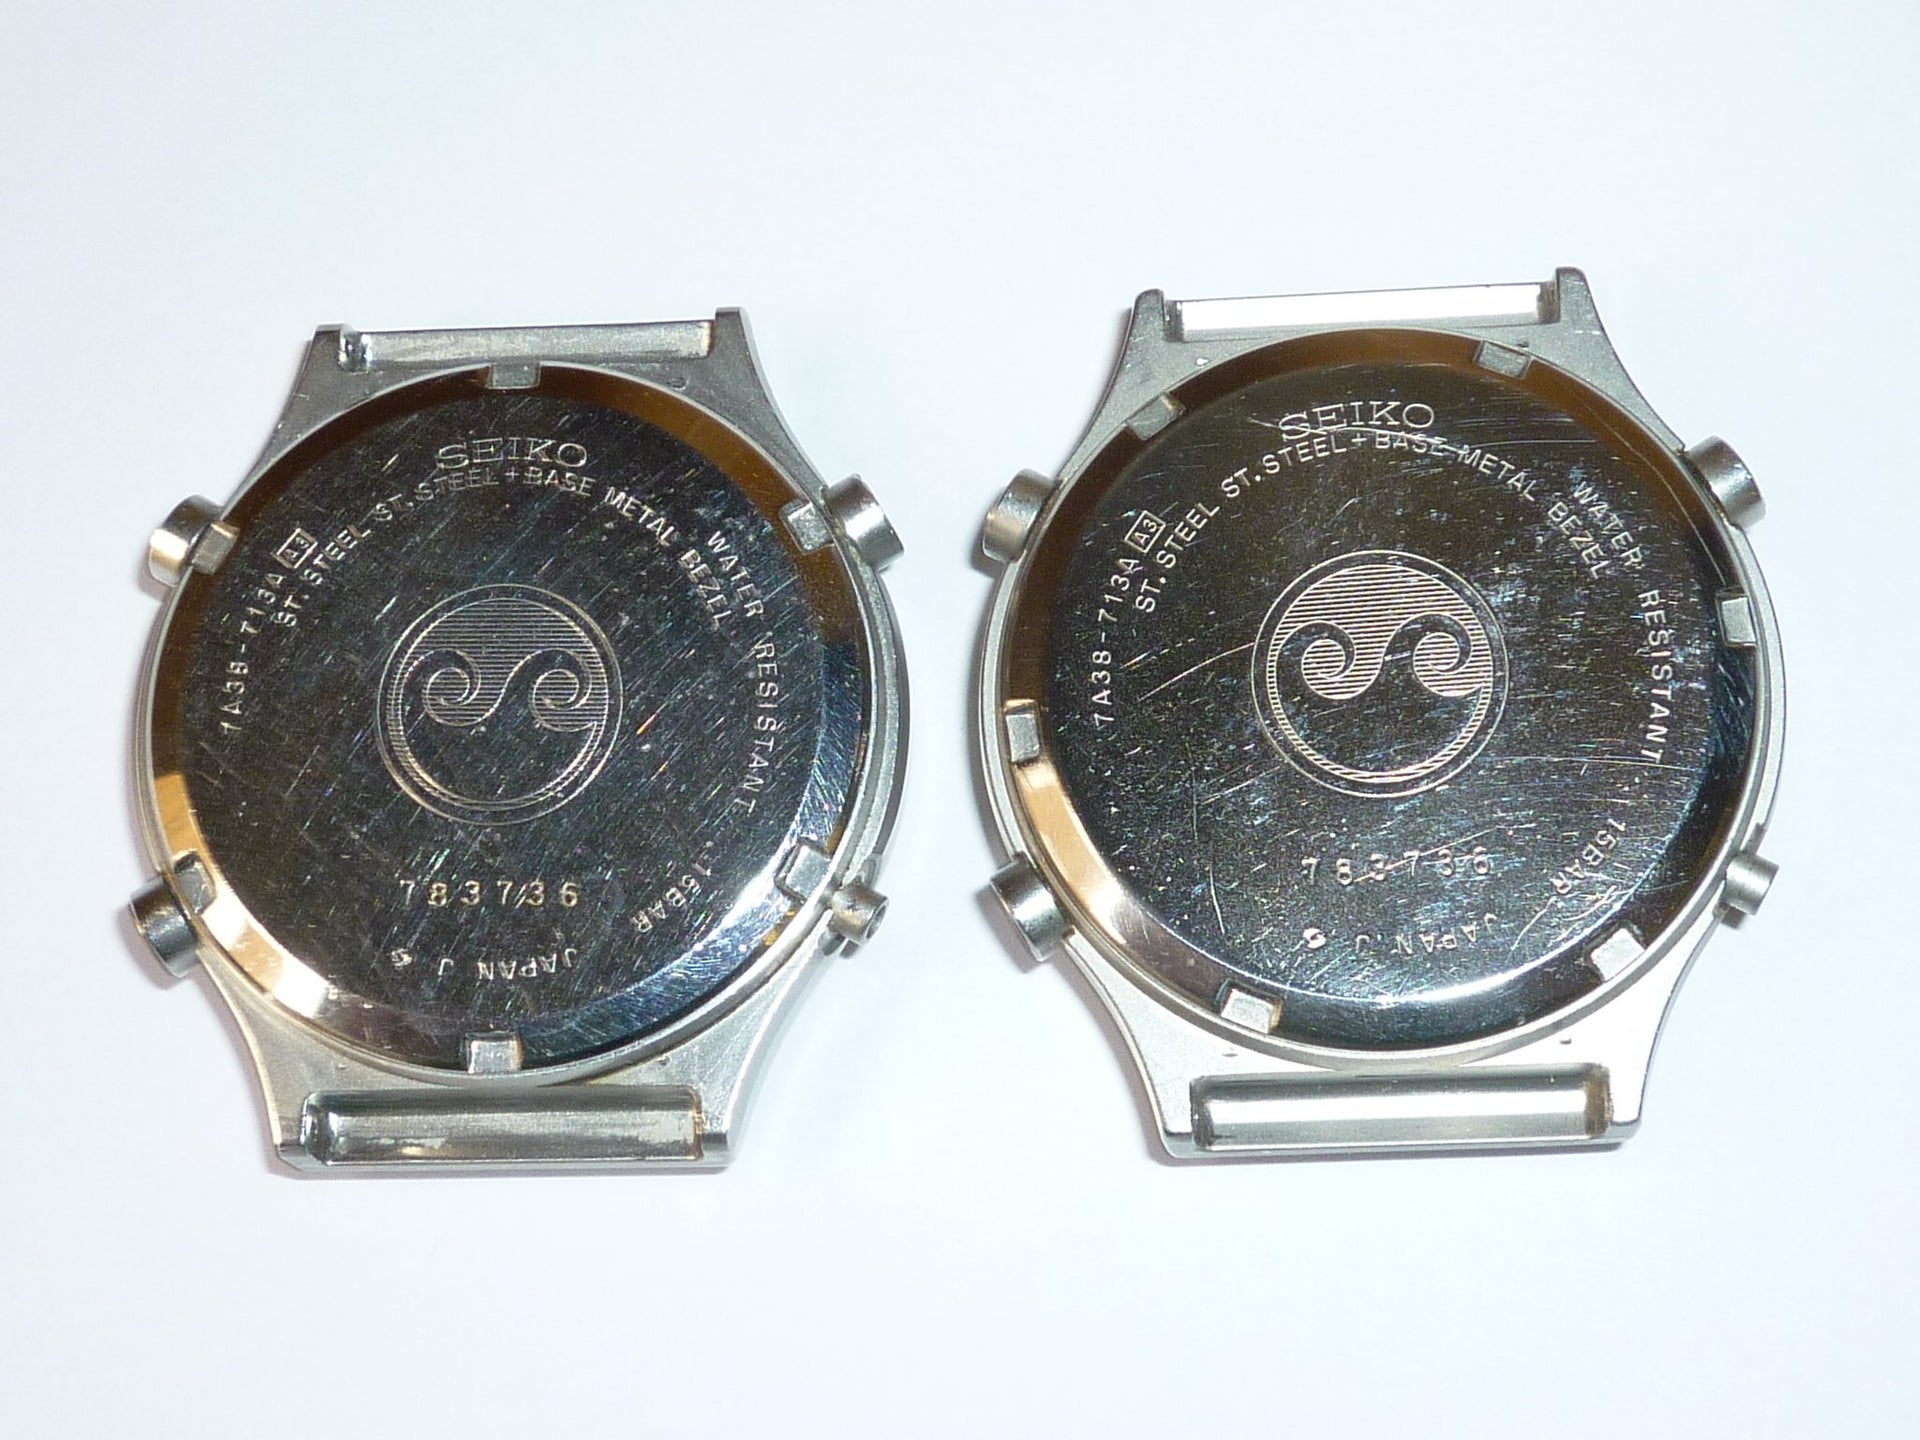 Duplicated Seiko case-back serial numbers !! | The Watch Site